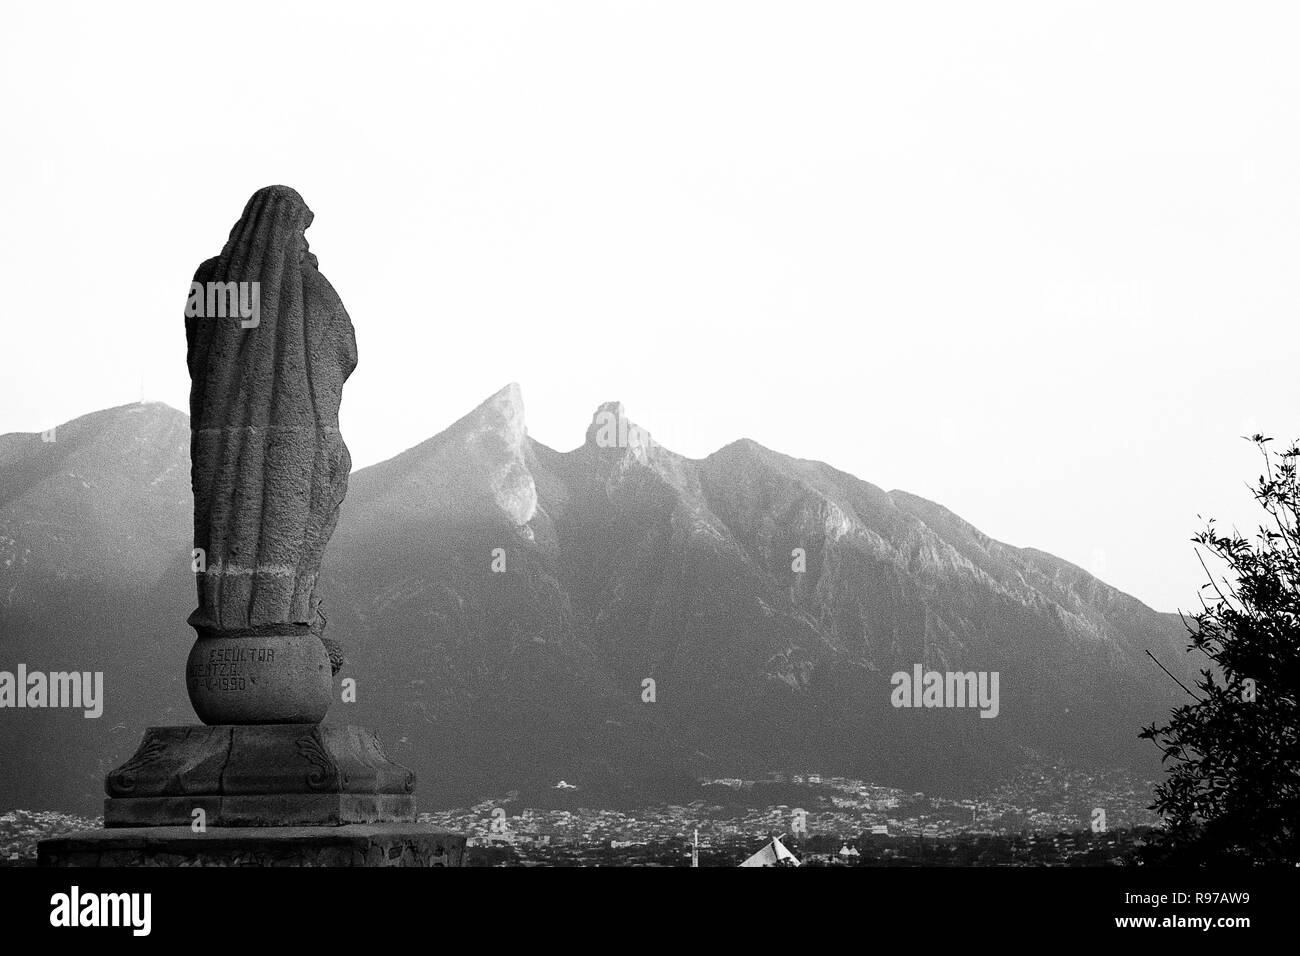 MONTERREY, NL/MEXICO - NOV 20, 2002: View from the Bishop's museum, Virgin of the Immaculate Conception sculpture and La Silla hill at dusk Stock Photo